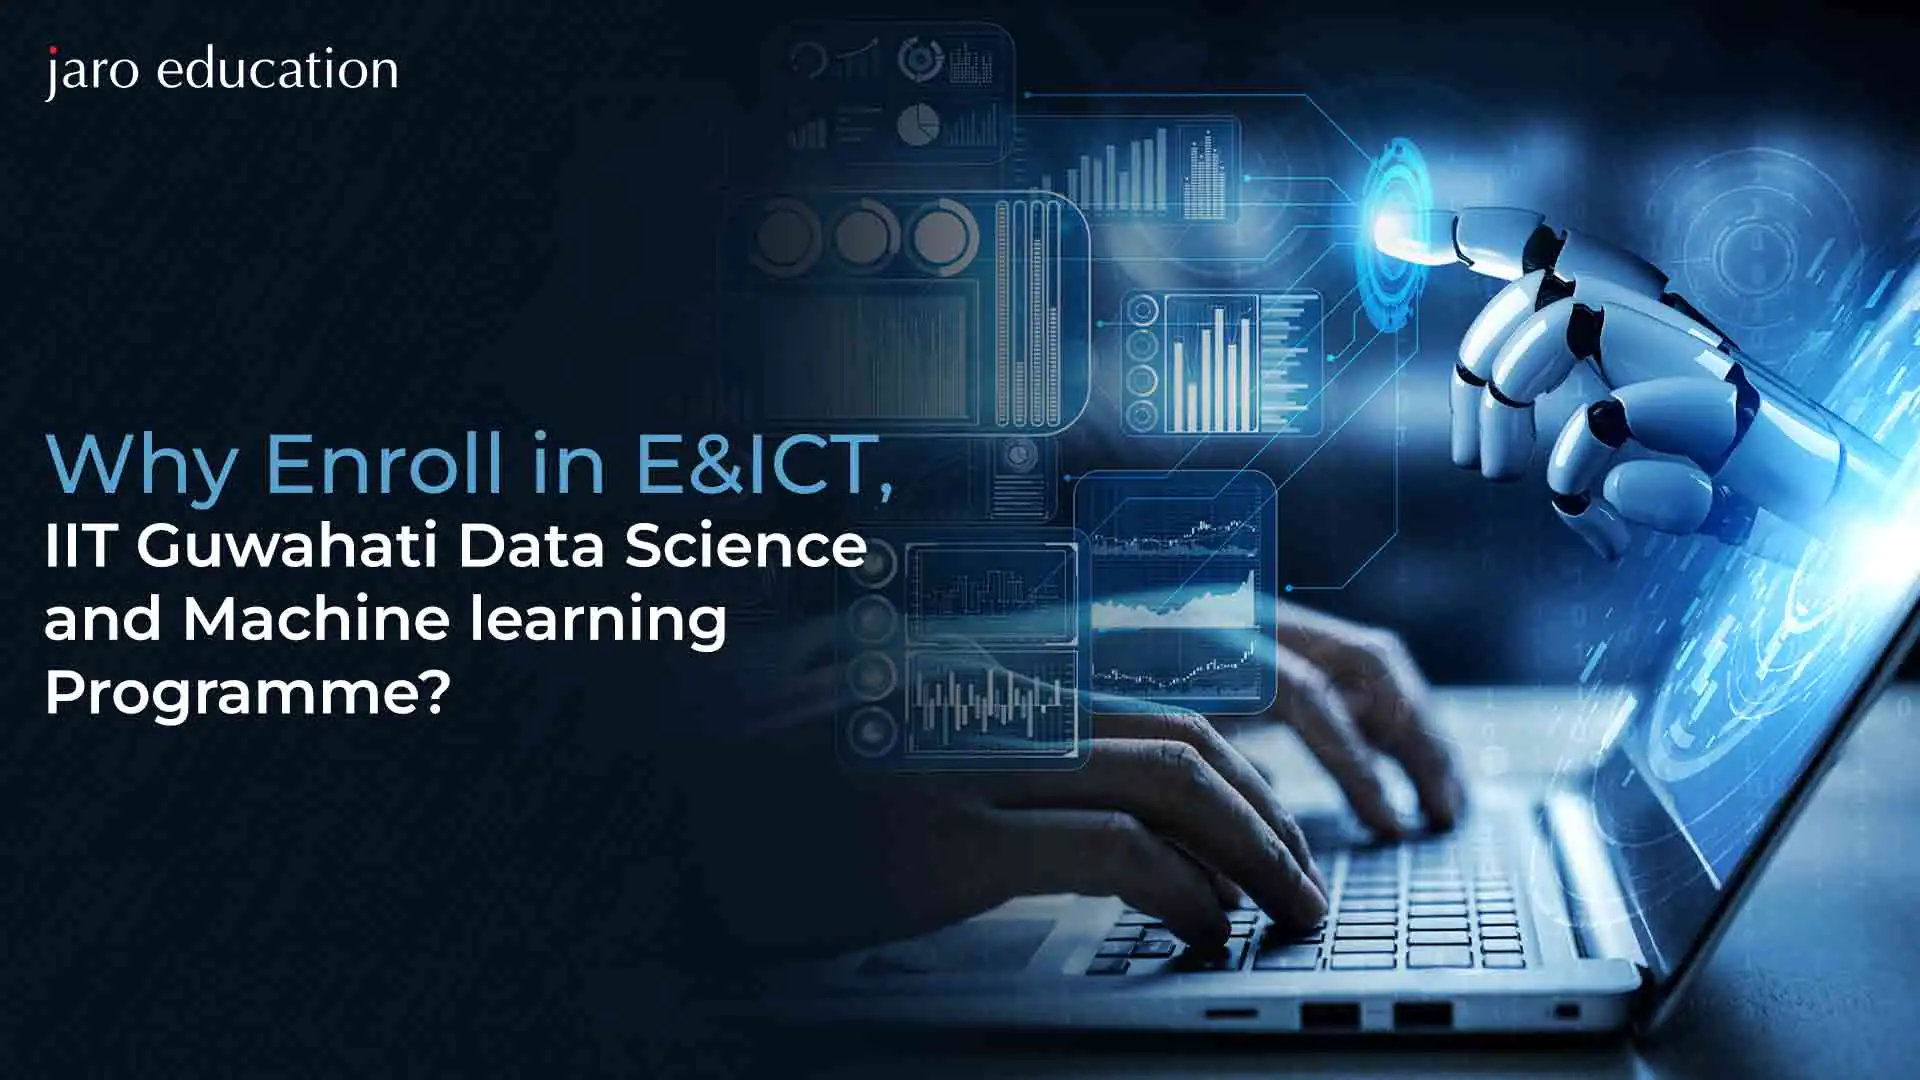 Why-Enrol-In-The-E&ICT,-IIT-Guwahati-Data-Science-And-Machine-learning-Programme